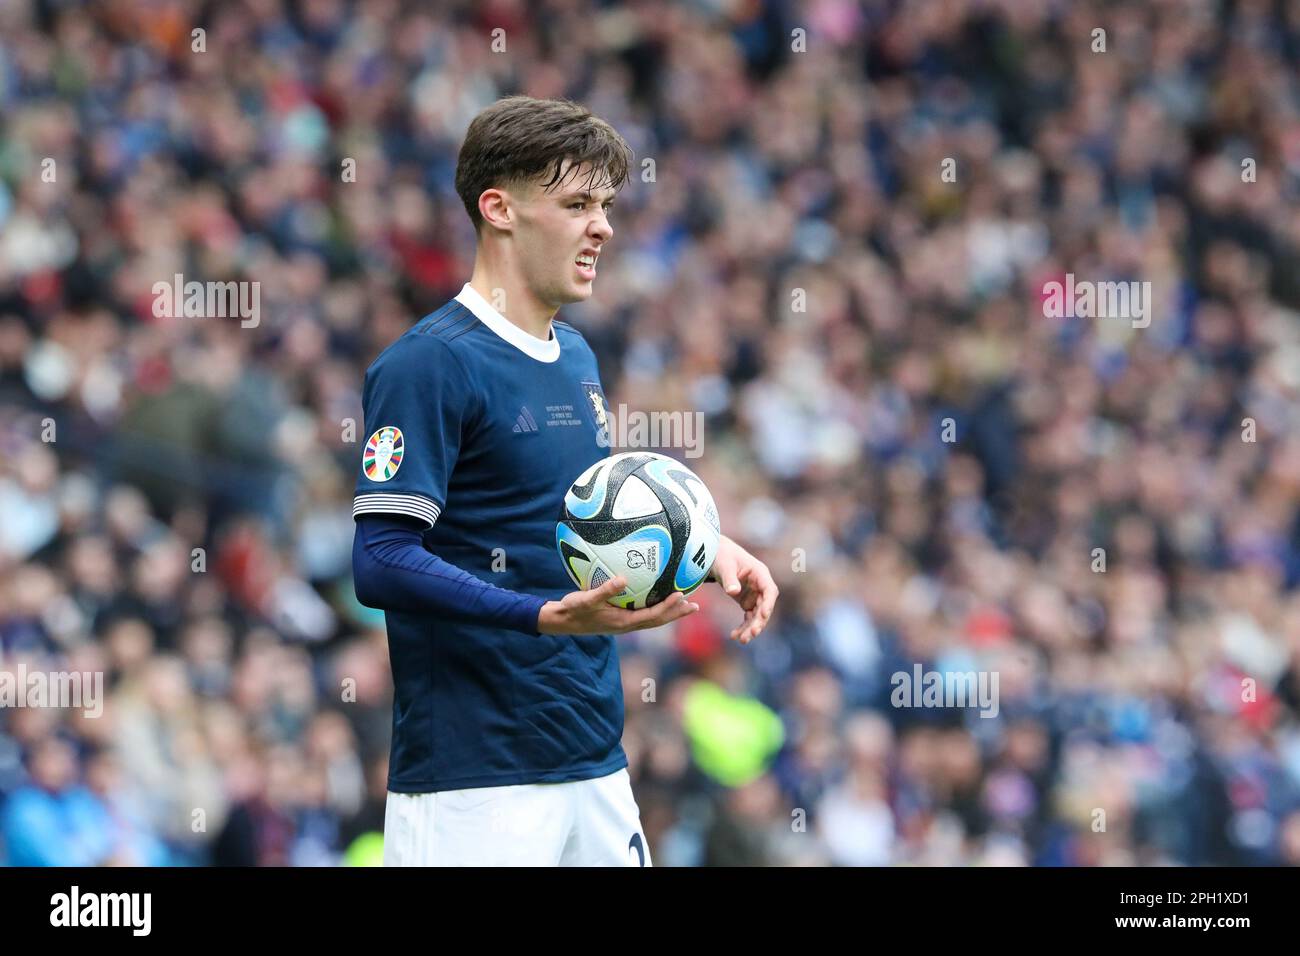 Glasgow, UK. 25th Mar, 2023. UK. Scotland played Cyprus in the European Championships 20324 Qualifying Round at Hampden Park, Glasgow, UK. Scotland won 3 - 0 with goals from McGinn (21 mins) and McTominay (87 mins and 90  3) Credit: Findlay/Alamy Live News Stock Photo